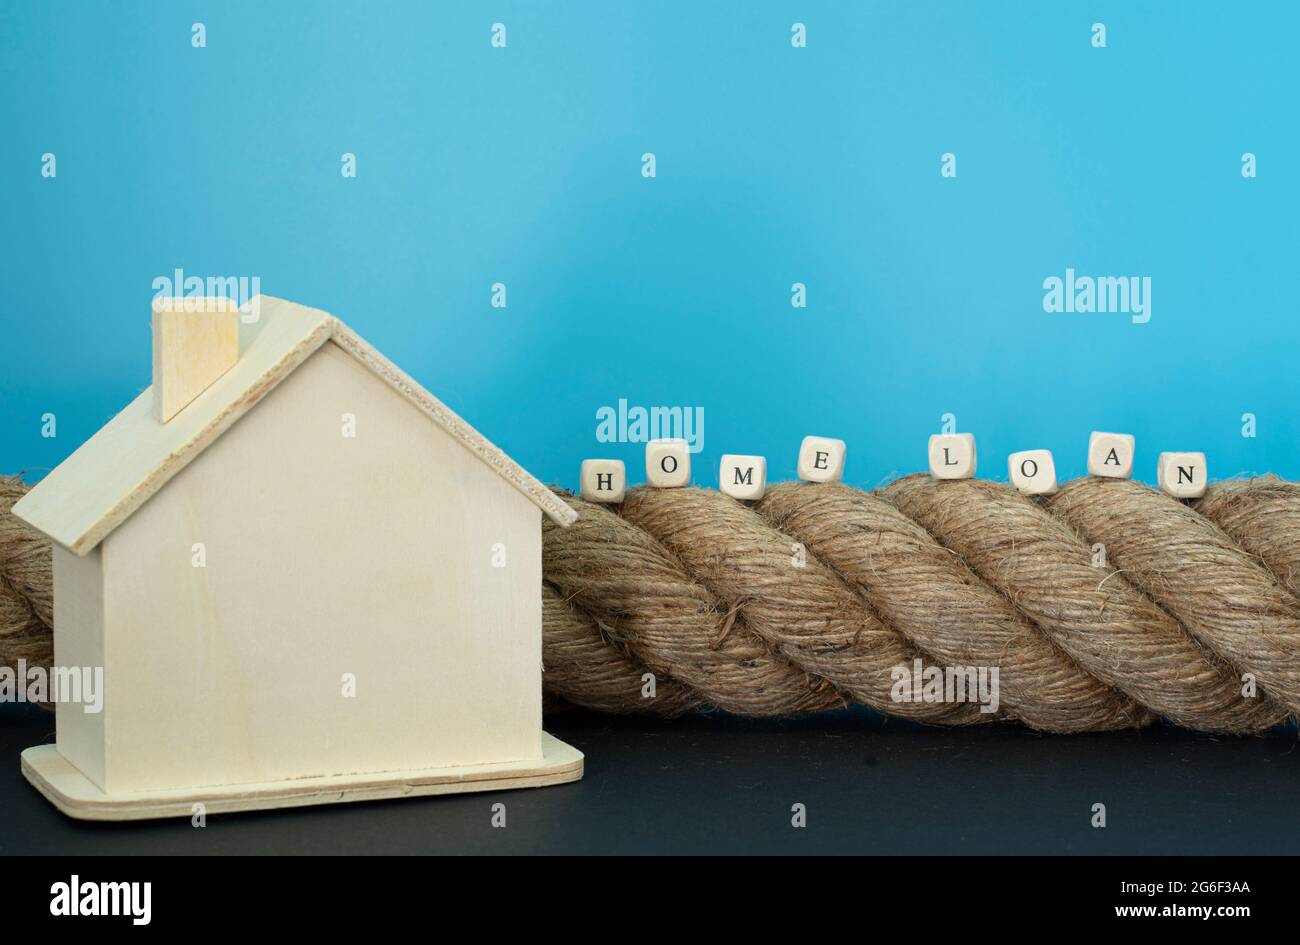 Financial concept. Rope, house model and wooden blocks with text. Selective focus points. Stock Photo